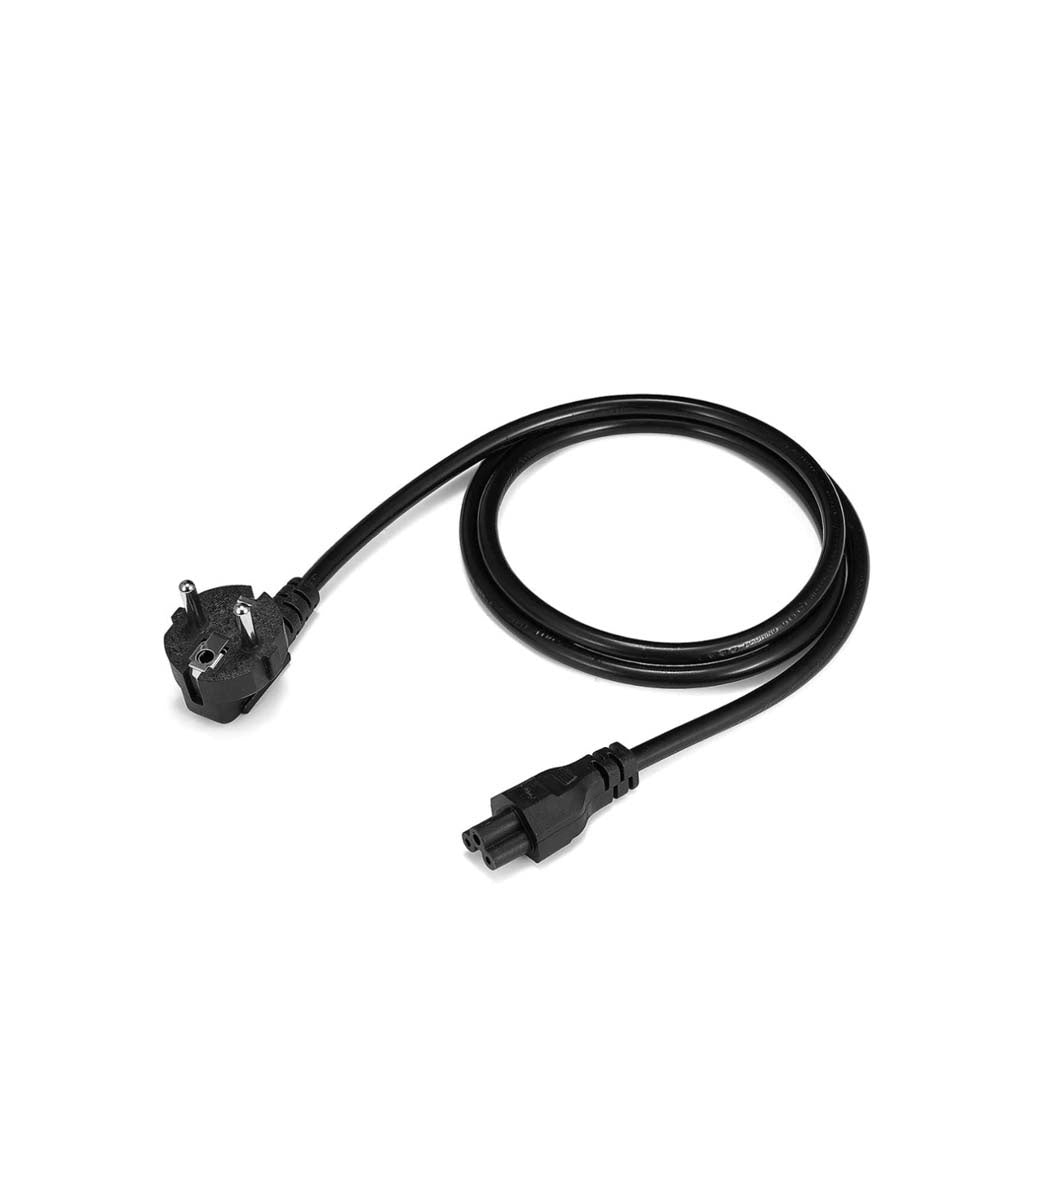 For Segway Ninebot Gokart Power Extension Cable Kit PRO S MAX Charger  Adapter